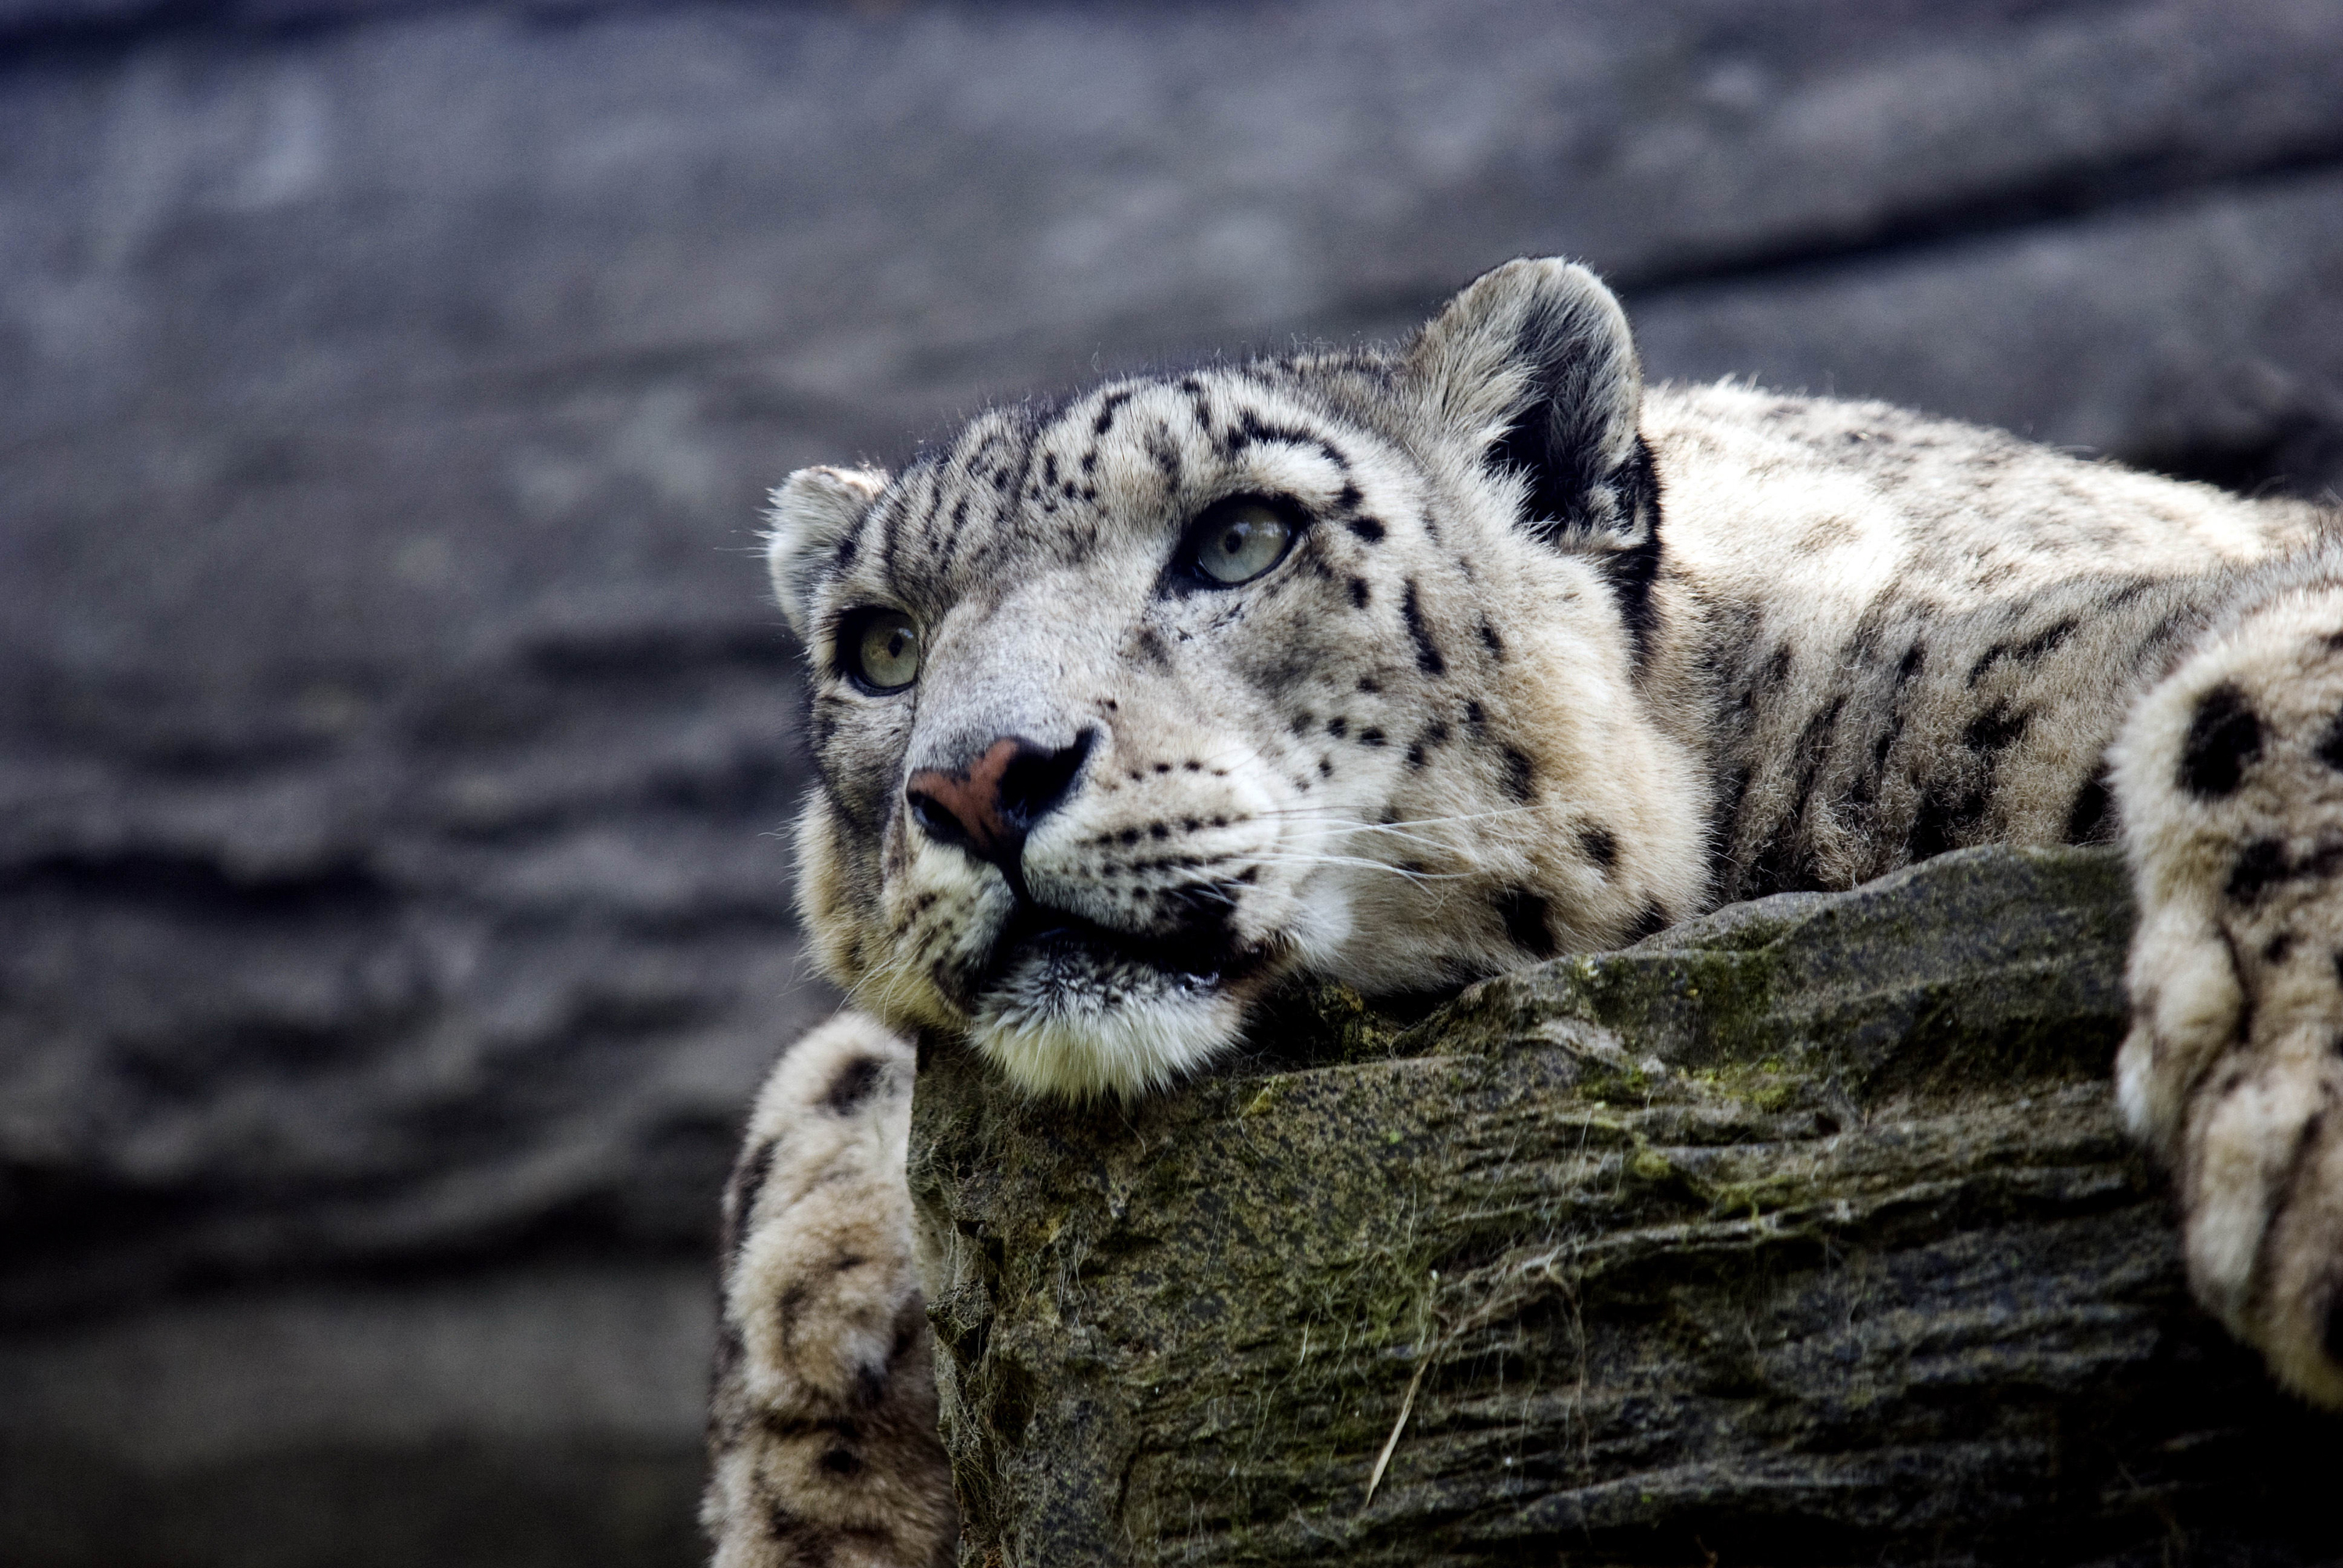 The snow leopard is resting